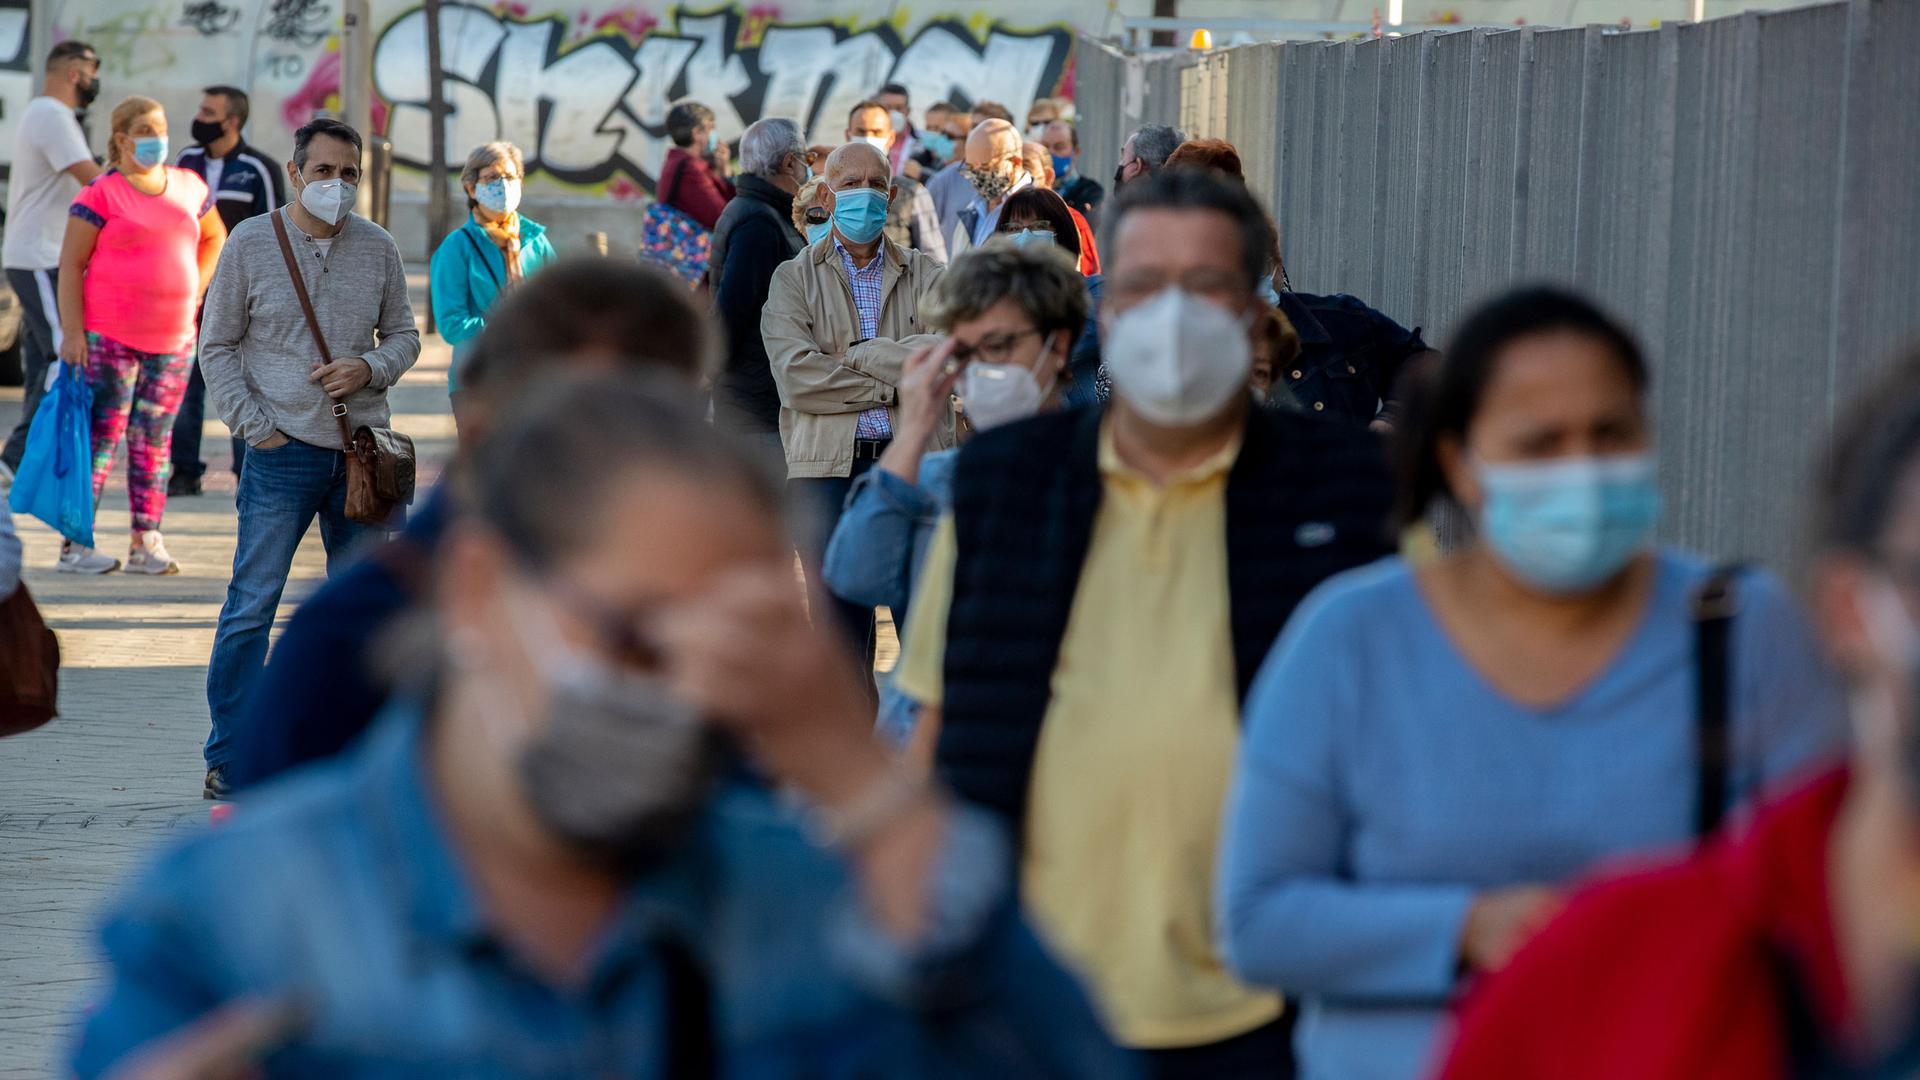 A long line of people are shown wearing face masks with wall painted with graffiti in the distance.